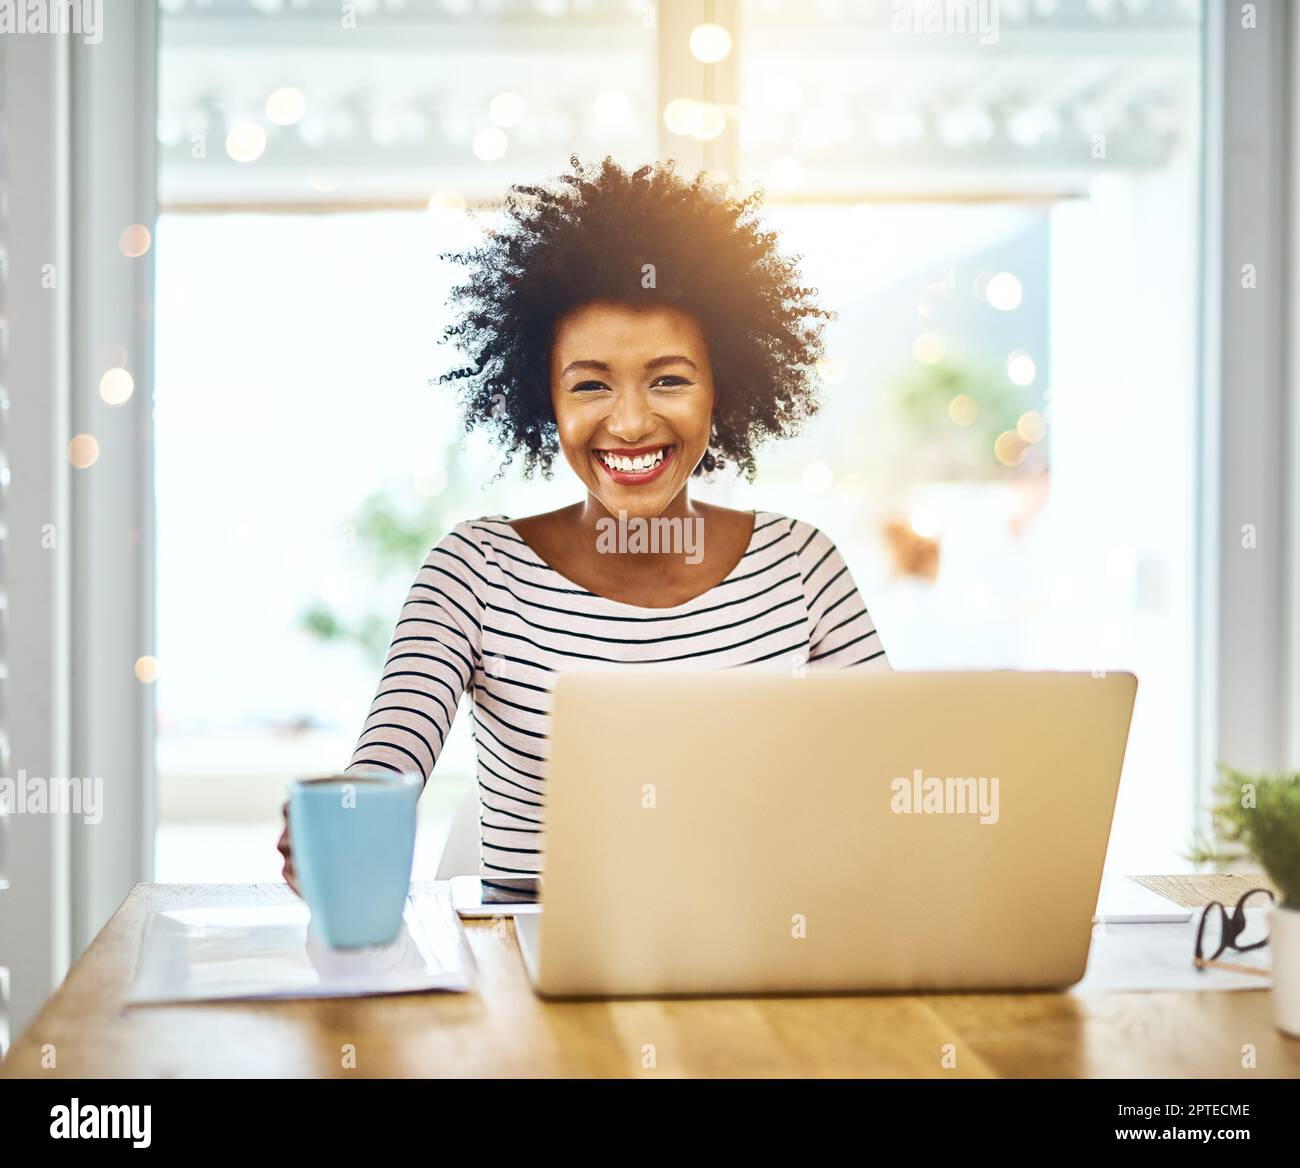 No stress when youre your own boss. Portrait of a cheerful young woman working on a laptop and drinking coffee while looking at the camera at home Stock Photo